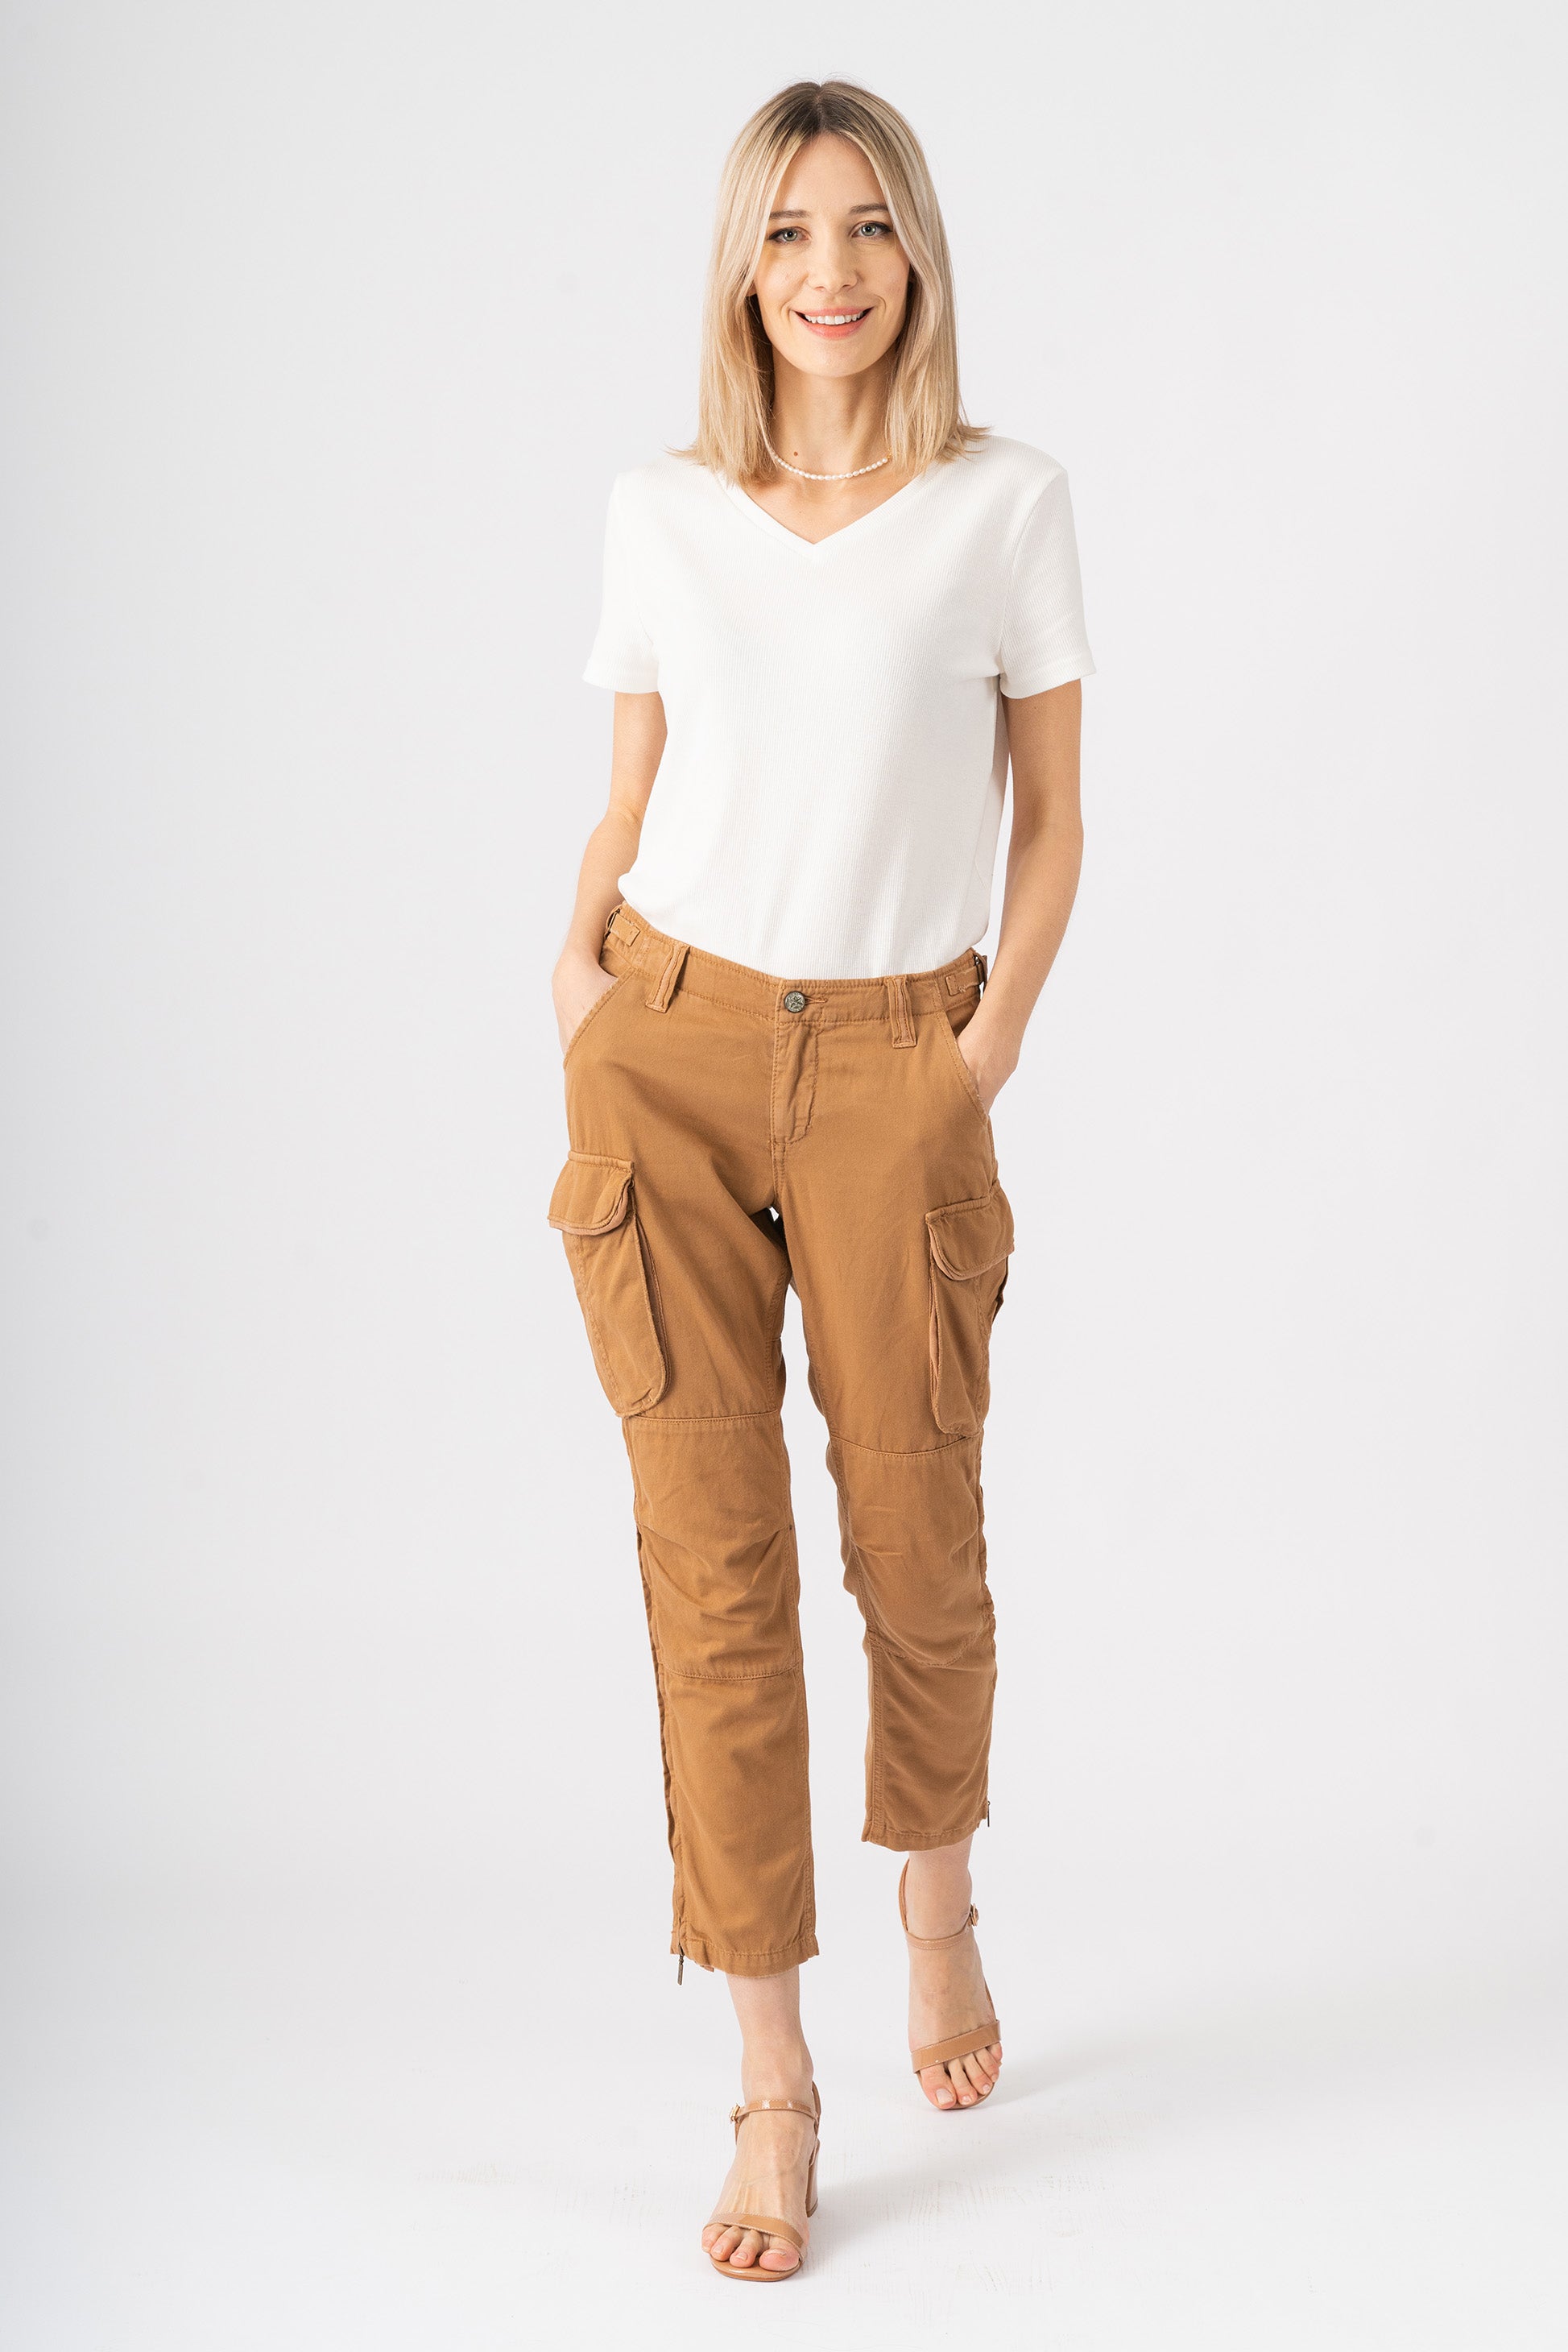 Easy fit cargo pants in Camel